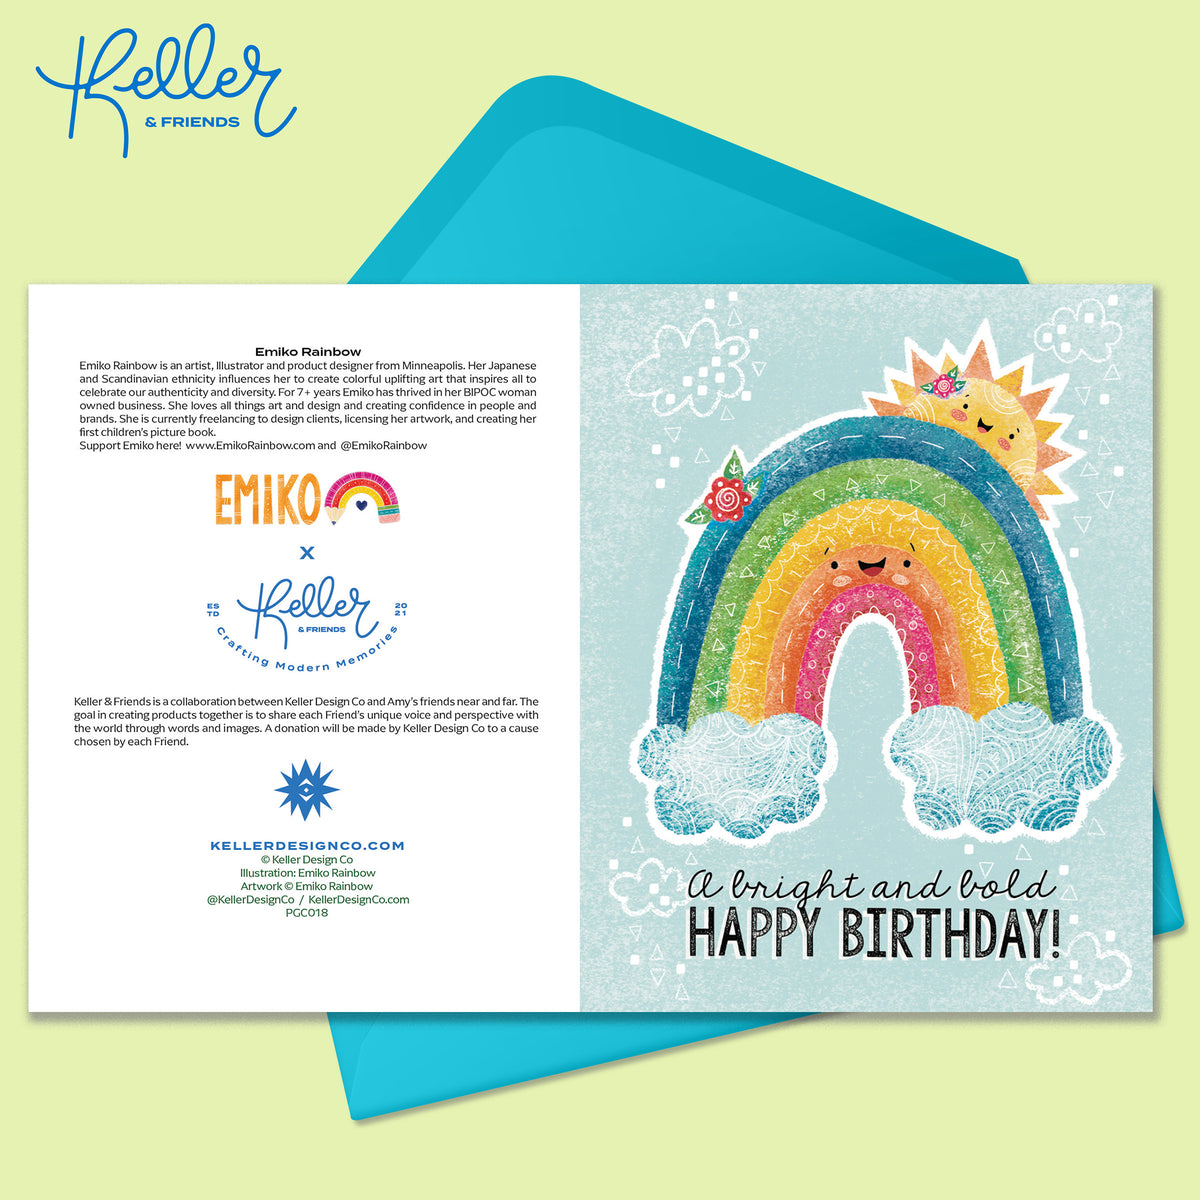 Greeting Card with a Smiling Rainbow and Sun with text that says A Bright and Bold Happy Birthday. There is a turquoise envelope on a lime green background